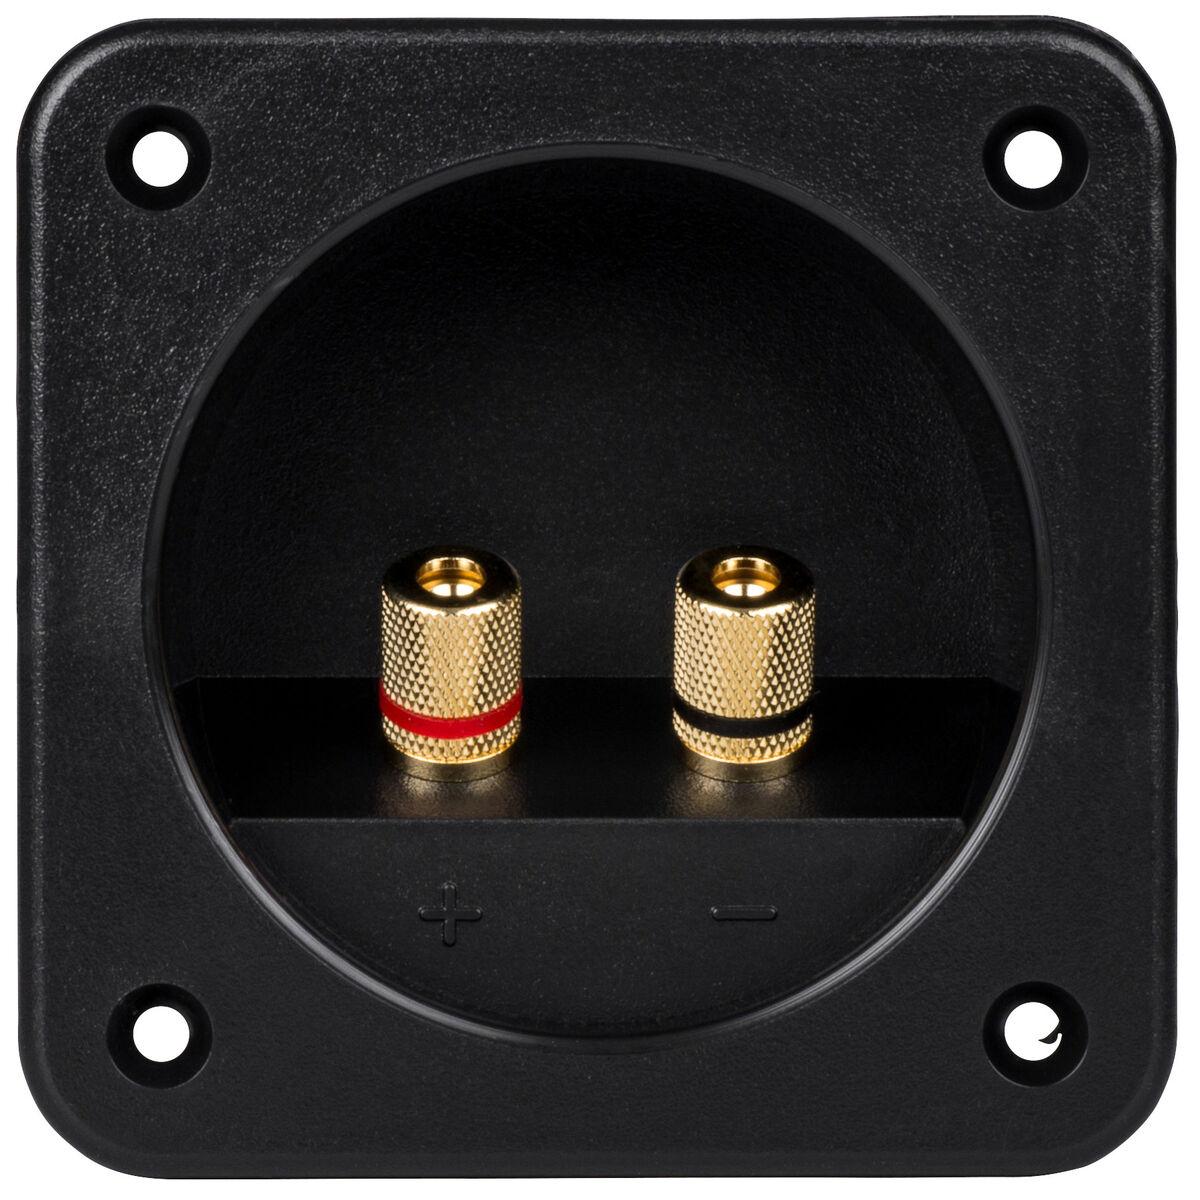 BLUECELL 1 Pair 3-Inch Double Binding Round Gold Plate Push Spring Loaded Jacks Speaker Box Terminal Cup 